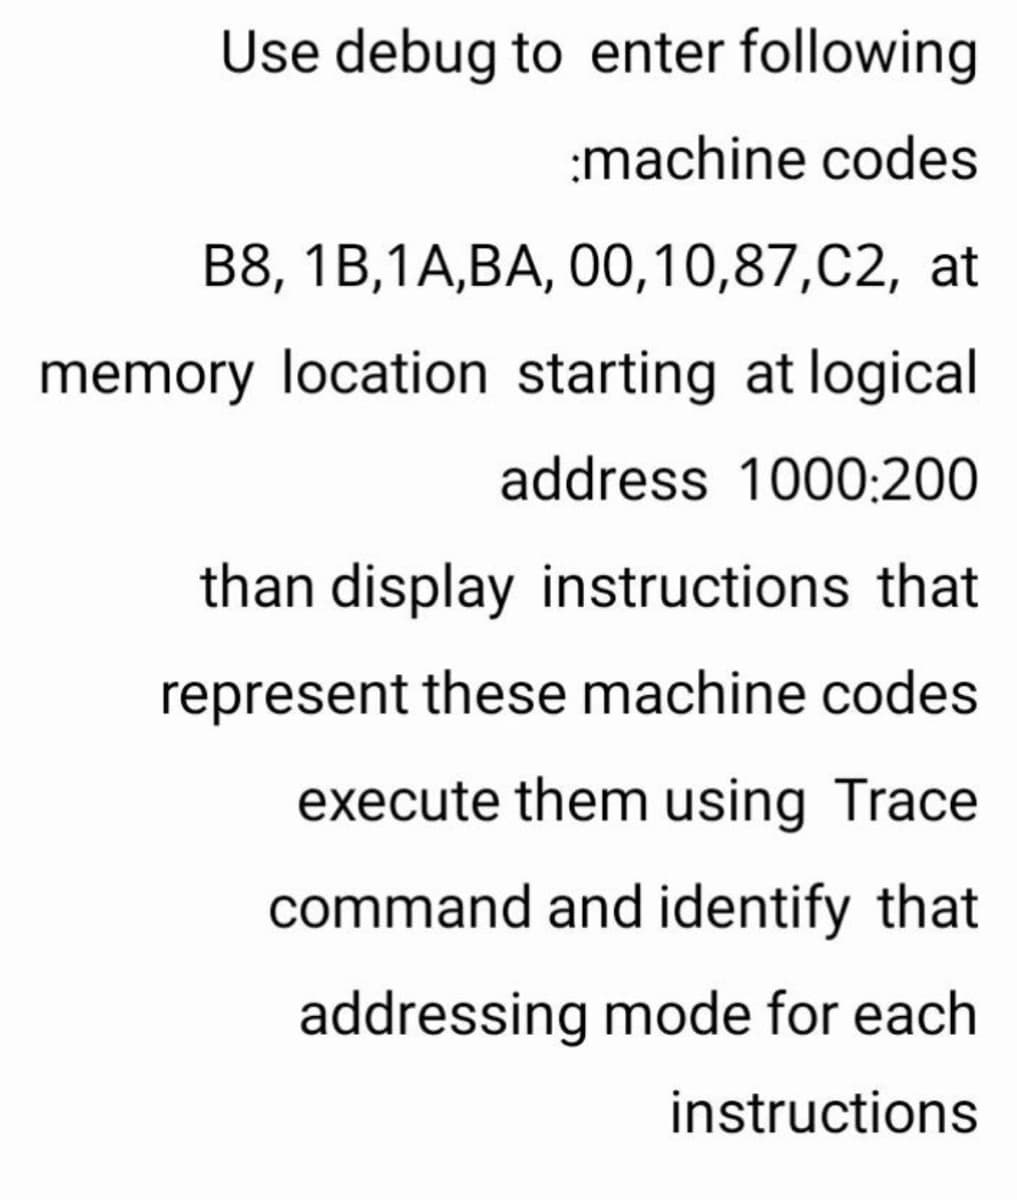 Use debug to enter following
:machine codes
В8, 1B,1A,ВА, О0,10,87,С2, at
memory location starting at logical
address 1000:200
than display instructions that
represent these machine codes
execute them using Trace
command and identify that
addressing mode for each
instructions
